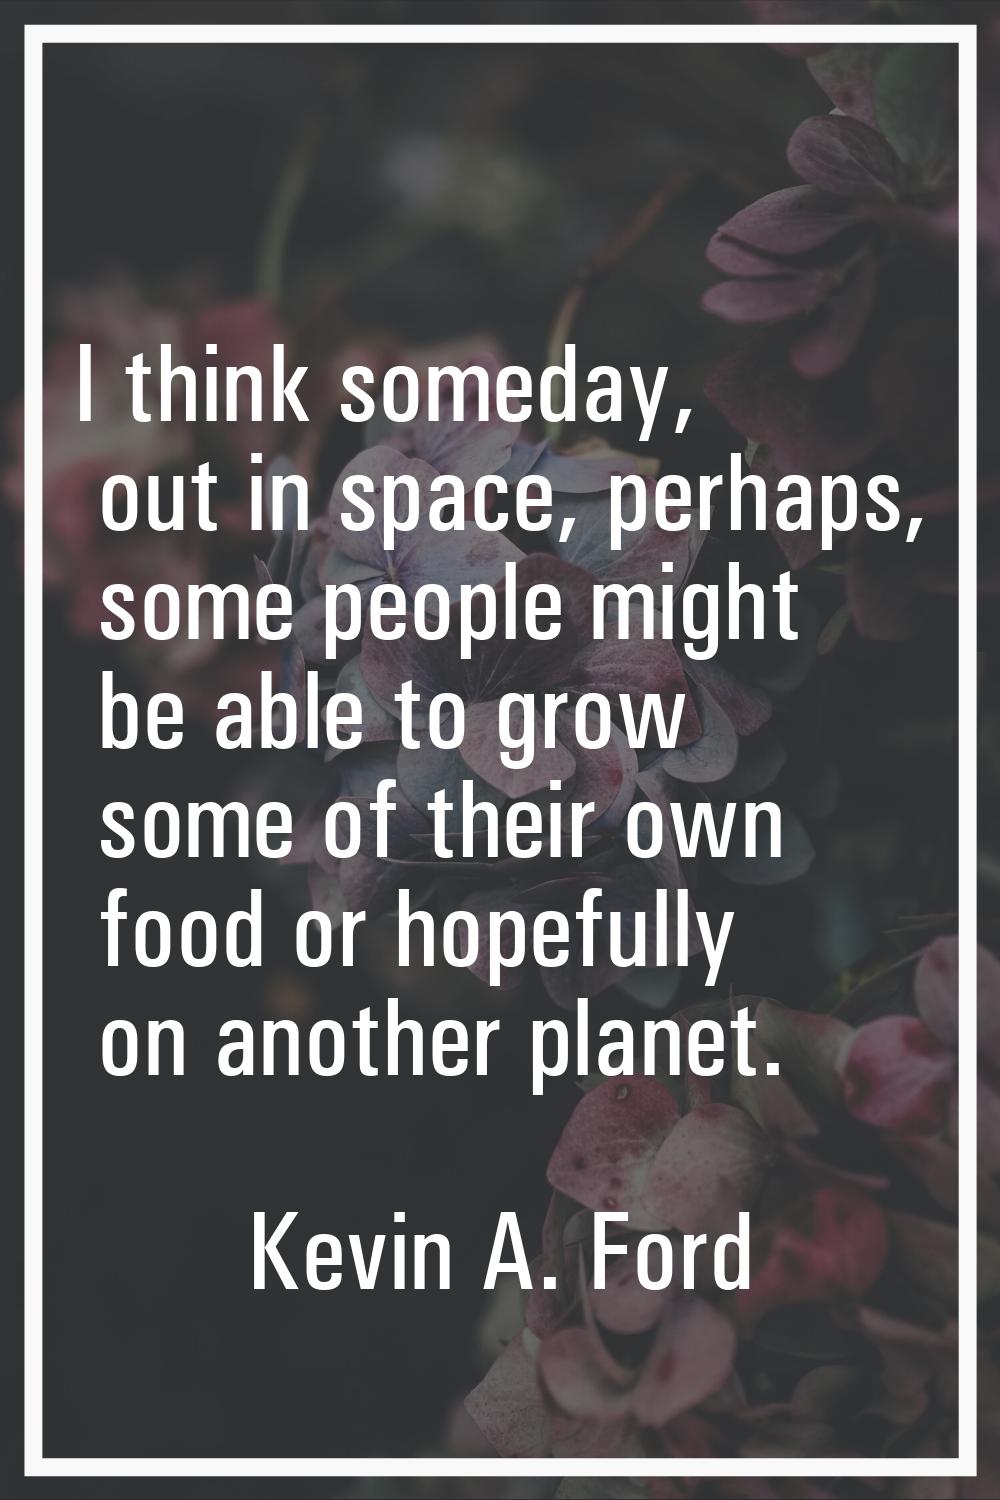 I think someday, out in space, perhaps, some people might be able to grow some of their own food or